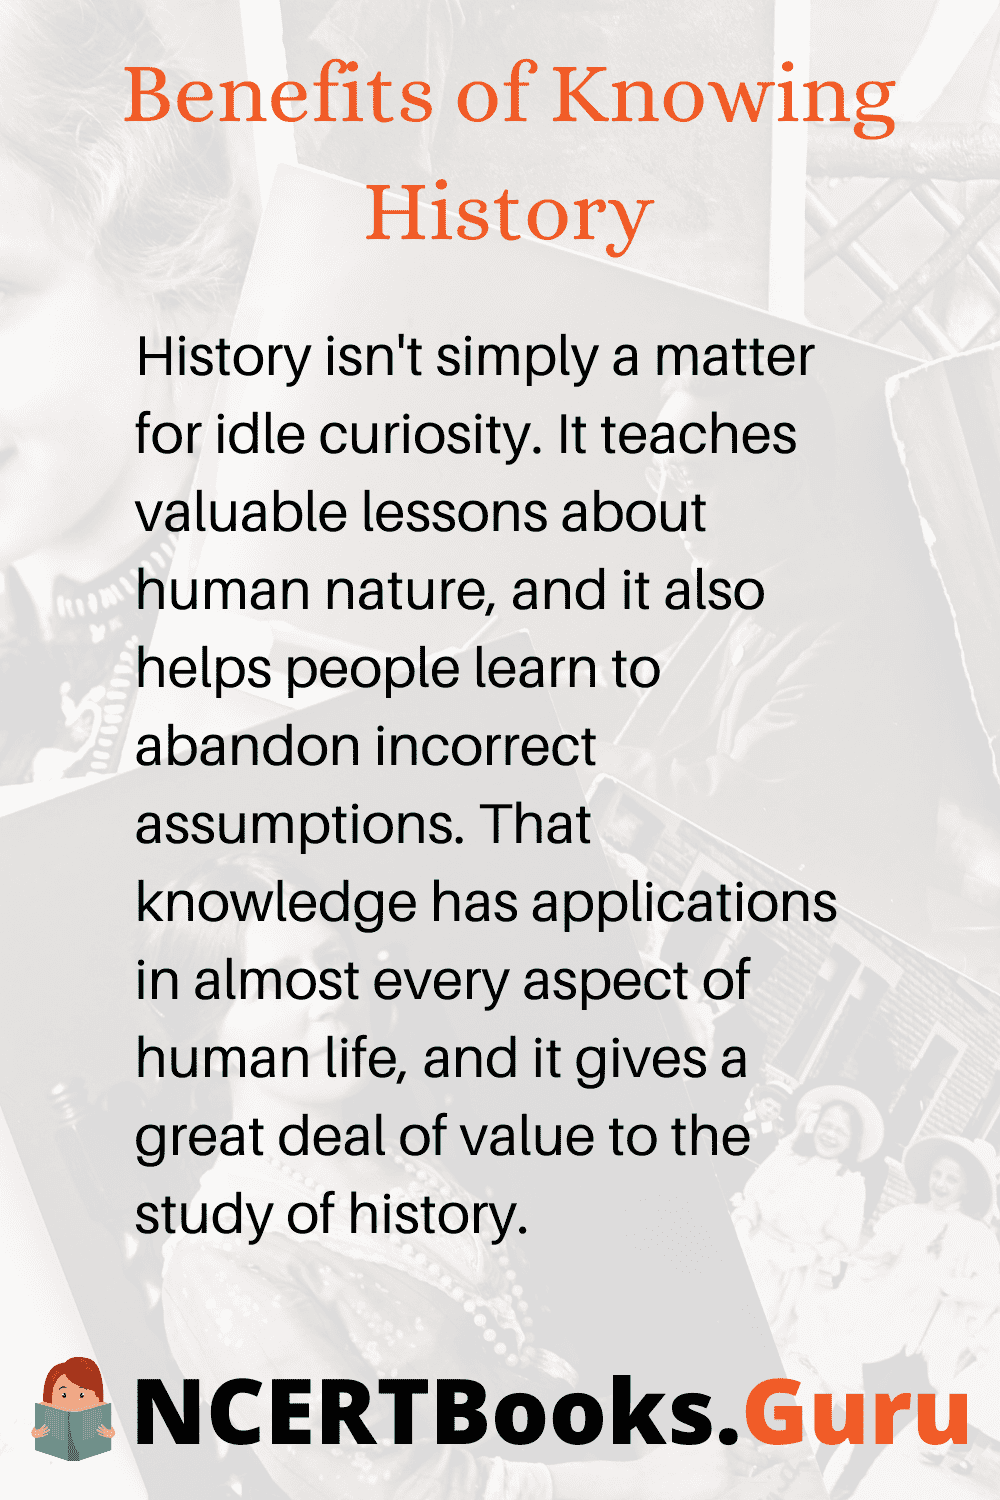 Benefits of Knowing History